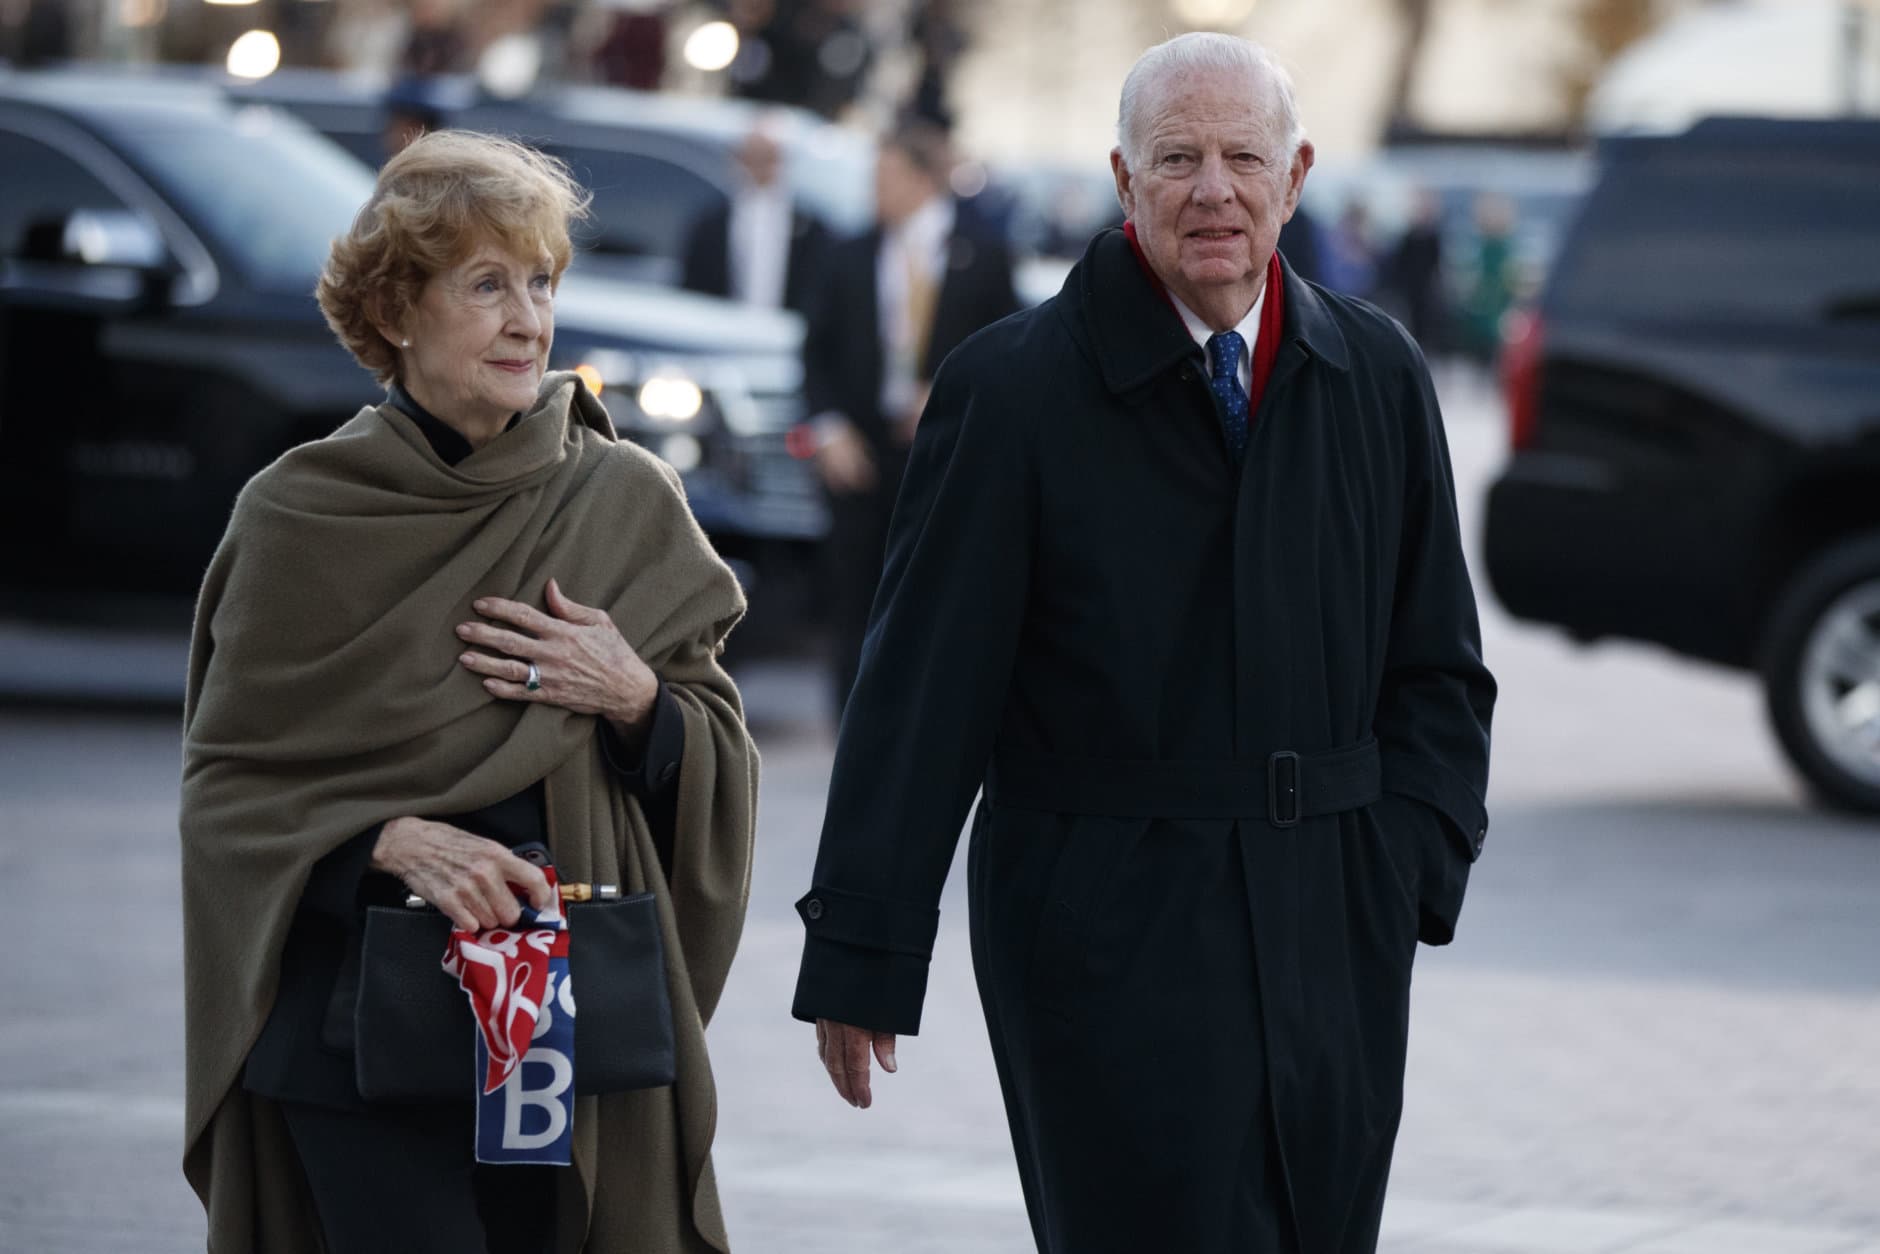 Former Secretary of State James Baker III arrives at the U.S. Capitol prior to the arrival of the body of former President George H. W. Bush in Washington, Monday, Dec. 3, 2018. Bush will lie in state in the Capitol Rotunda. (Shawn Thew/Pool Photo via AP)